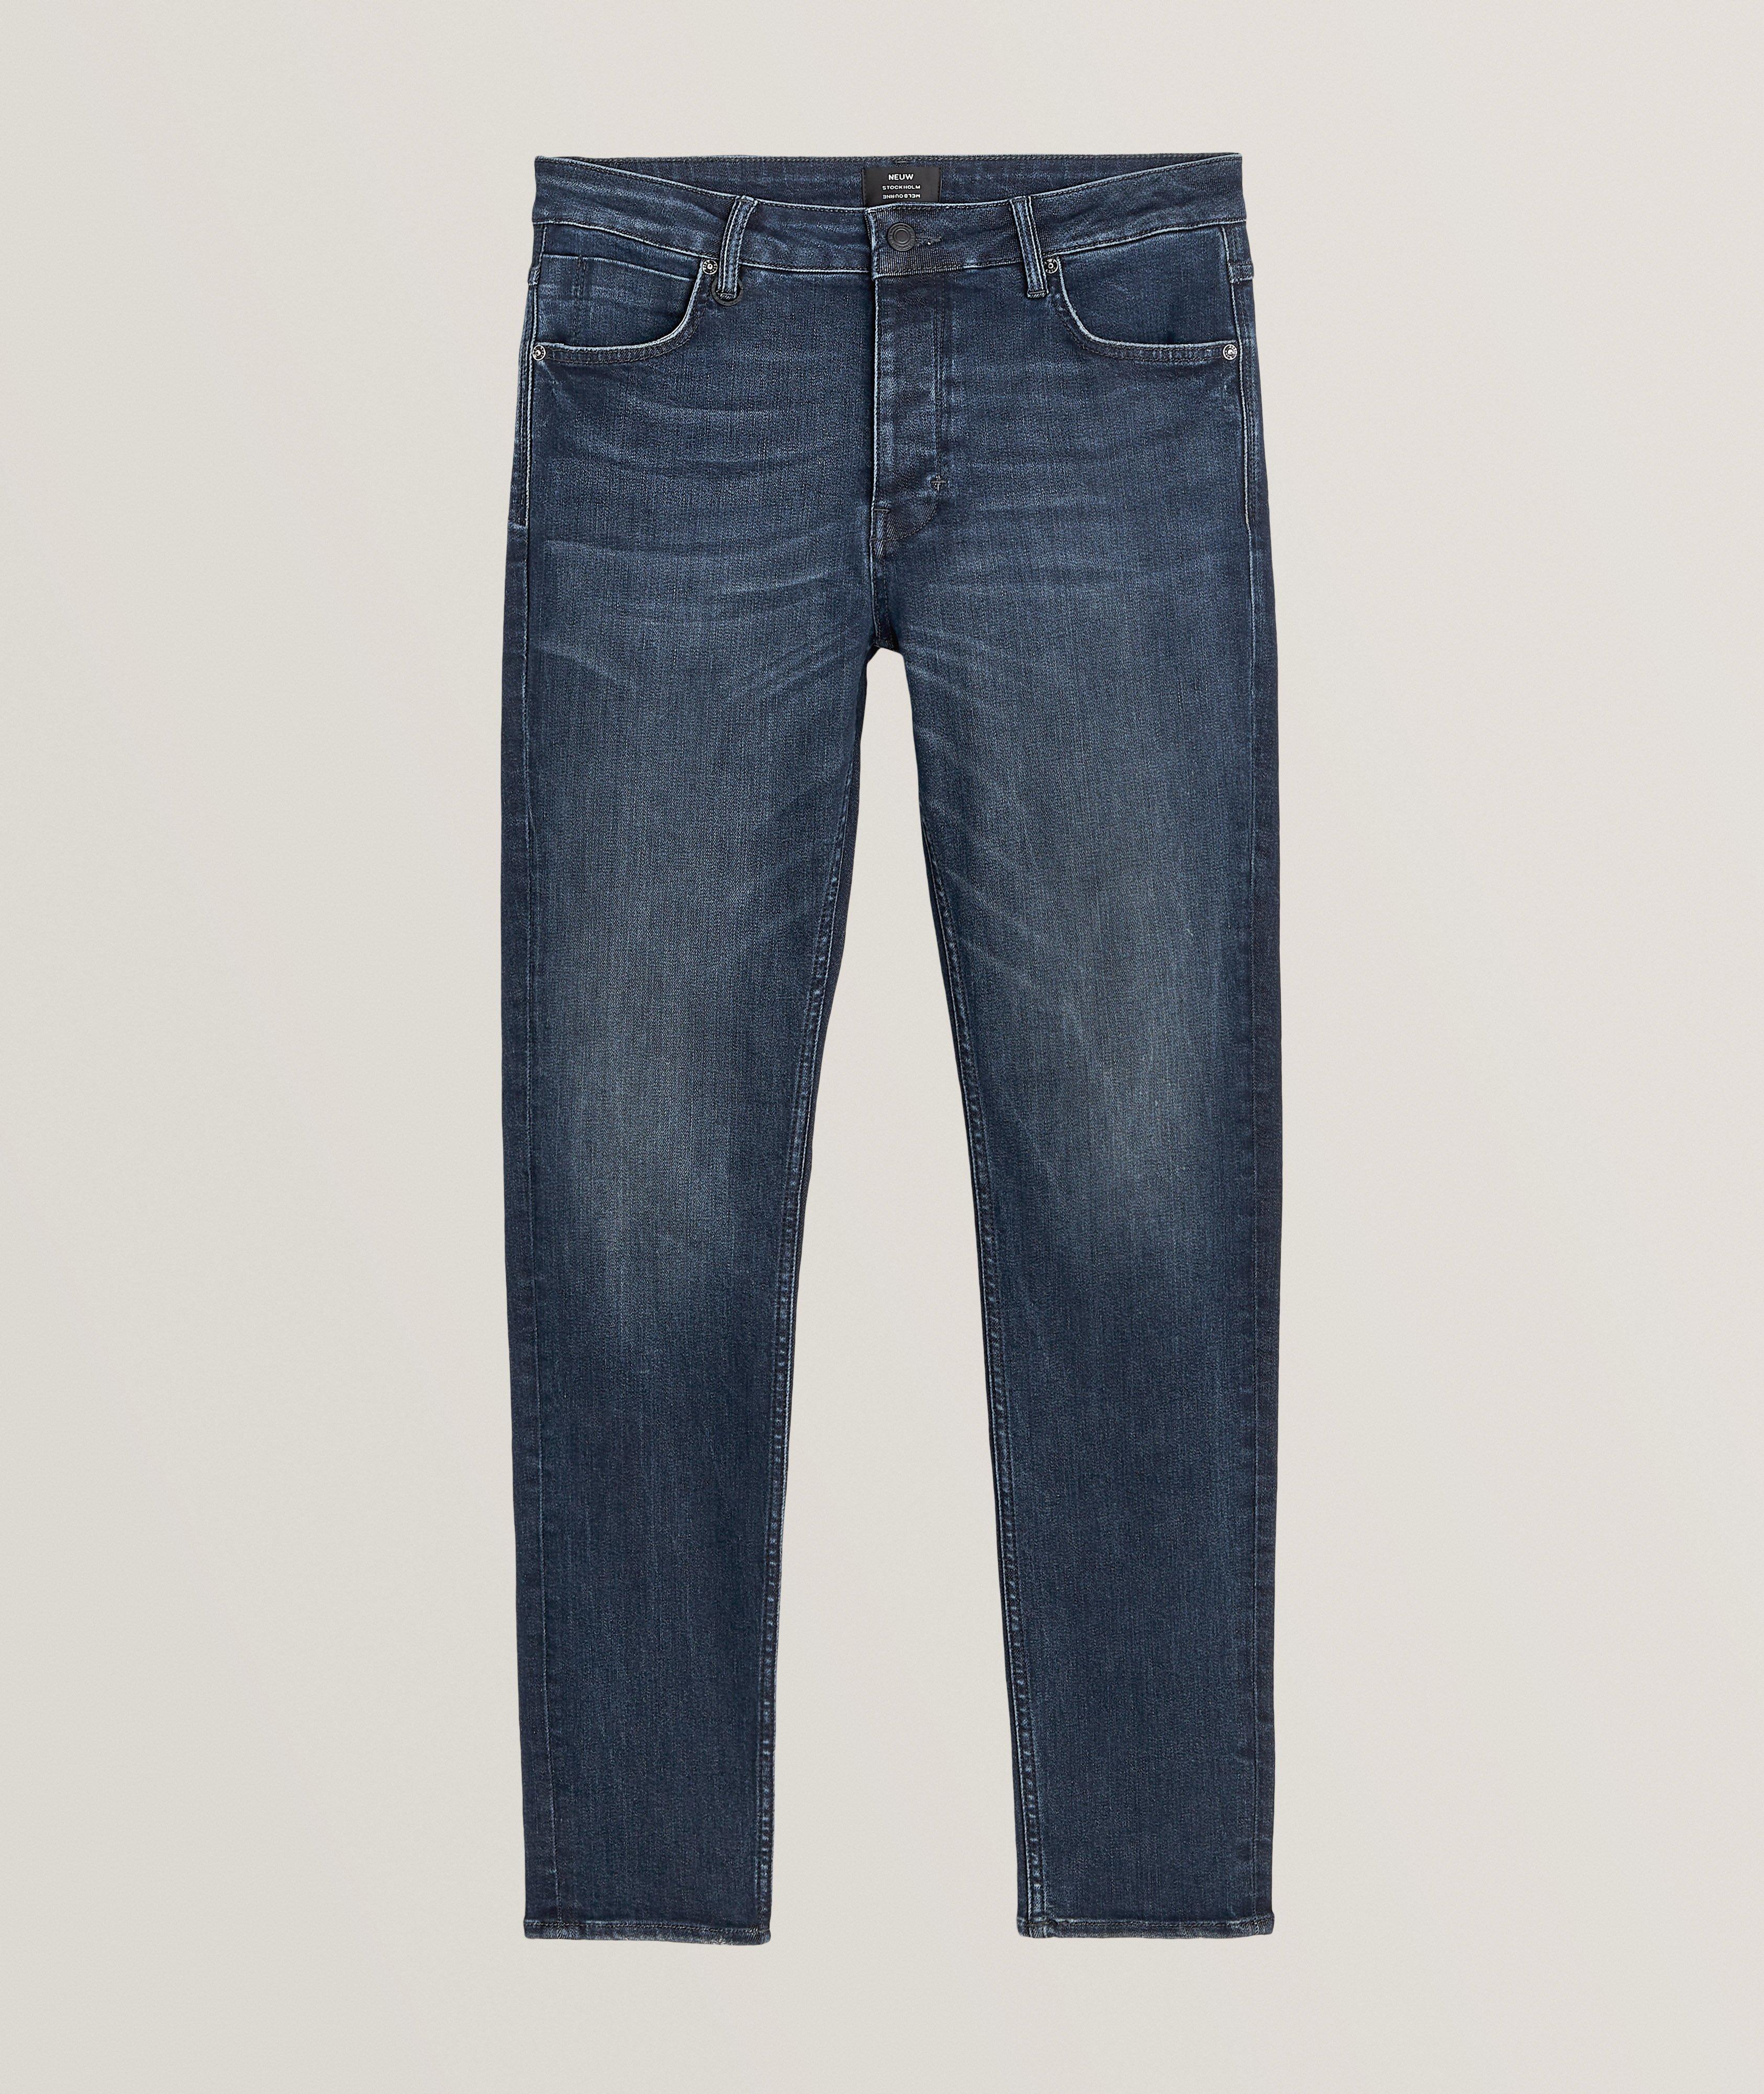 Ray Tappered Stretch-Cotton Jeans image 0